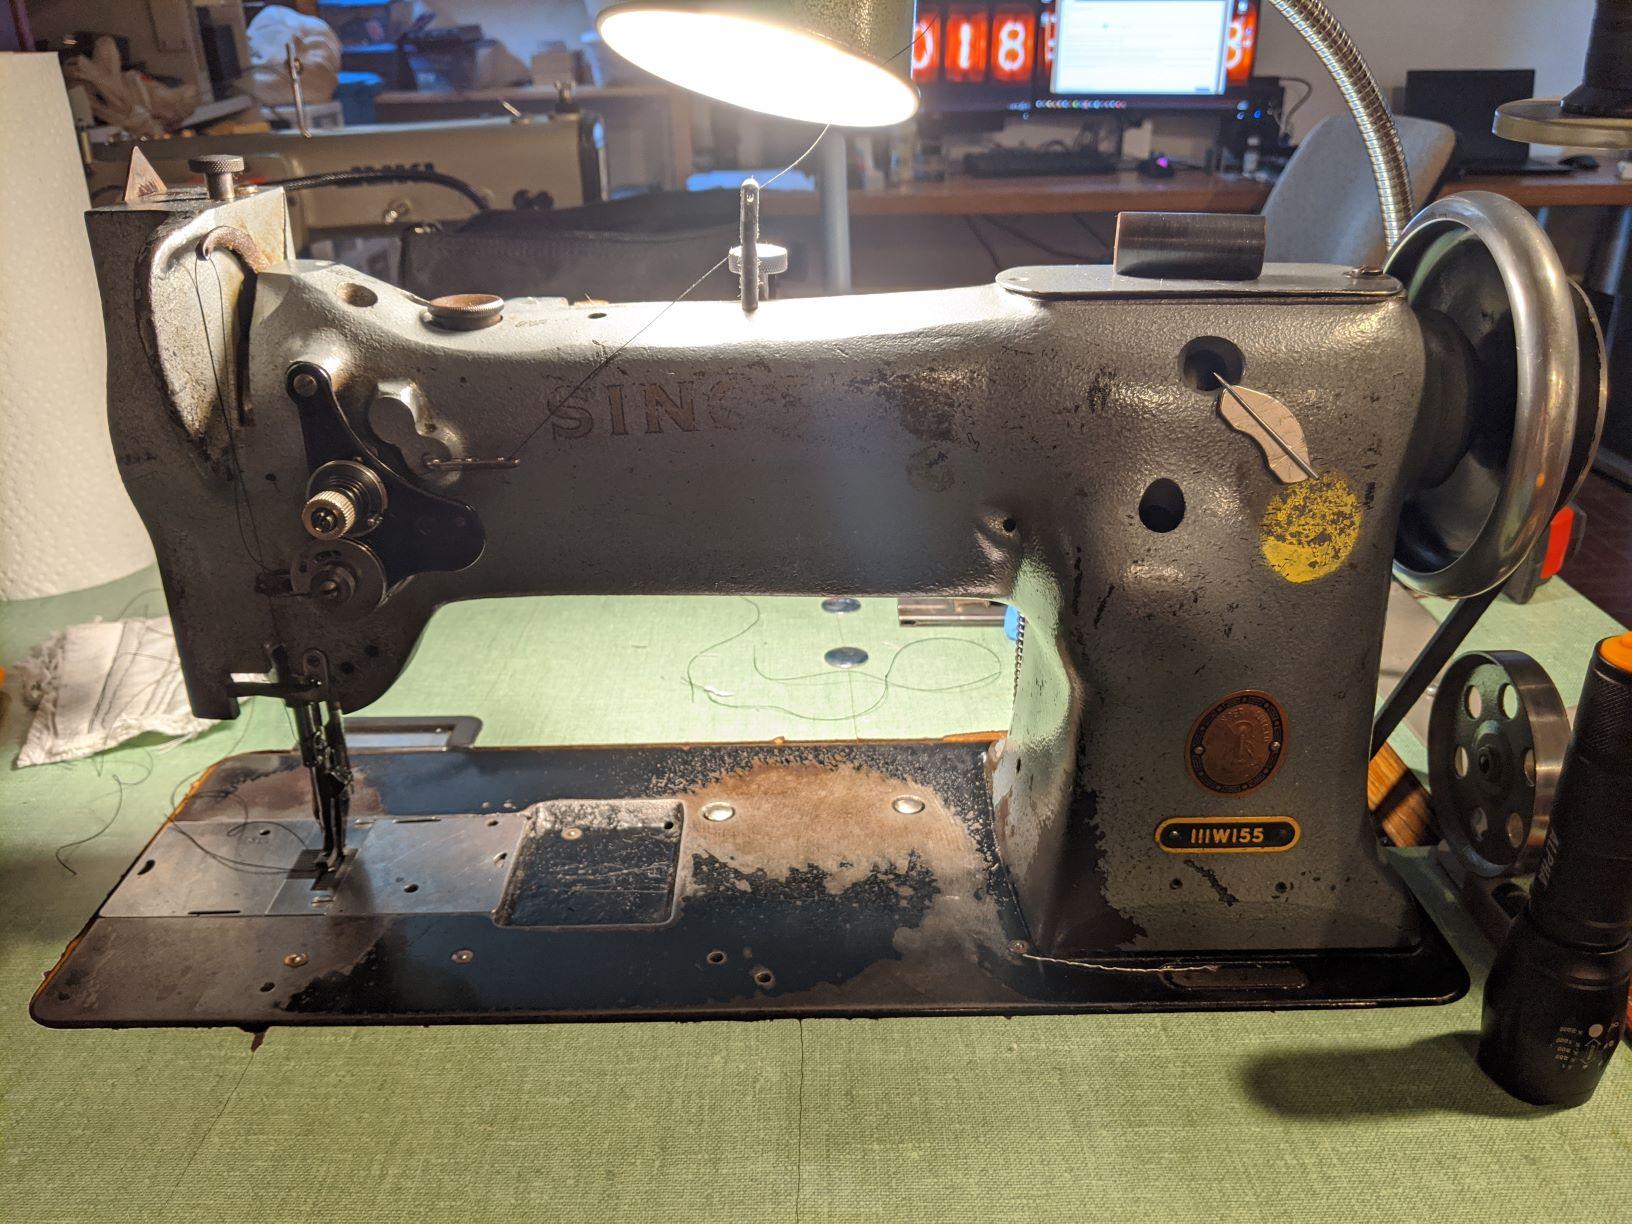 Singer Used Industrial Straight Stitch Machines, featuring model 111w155